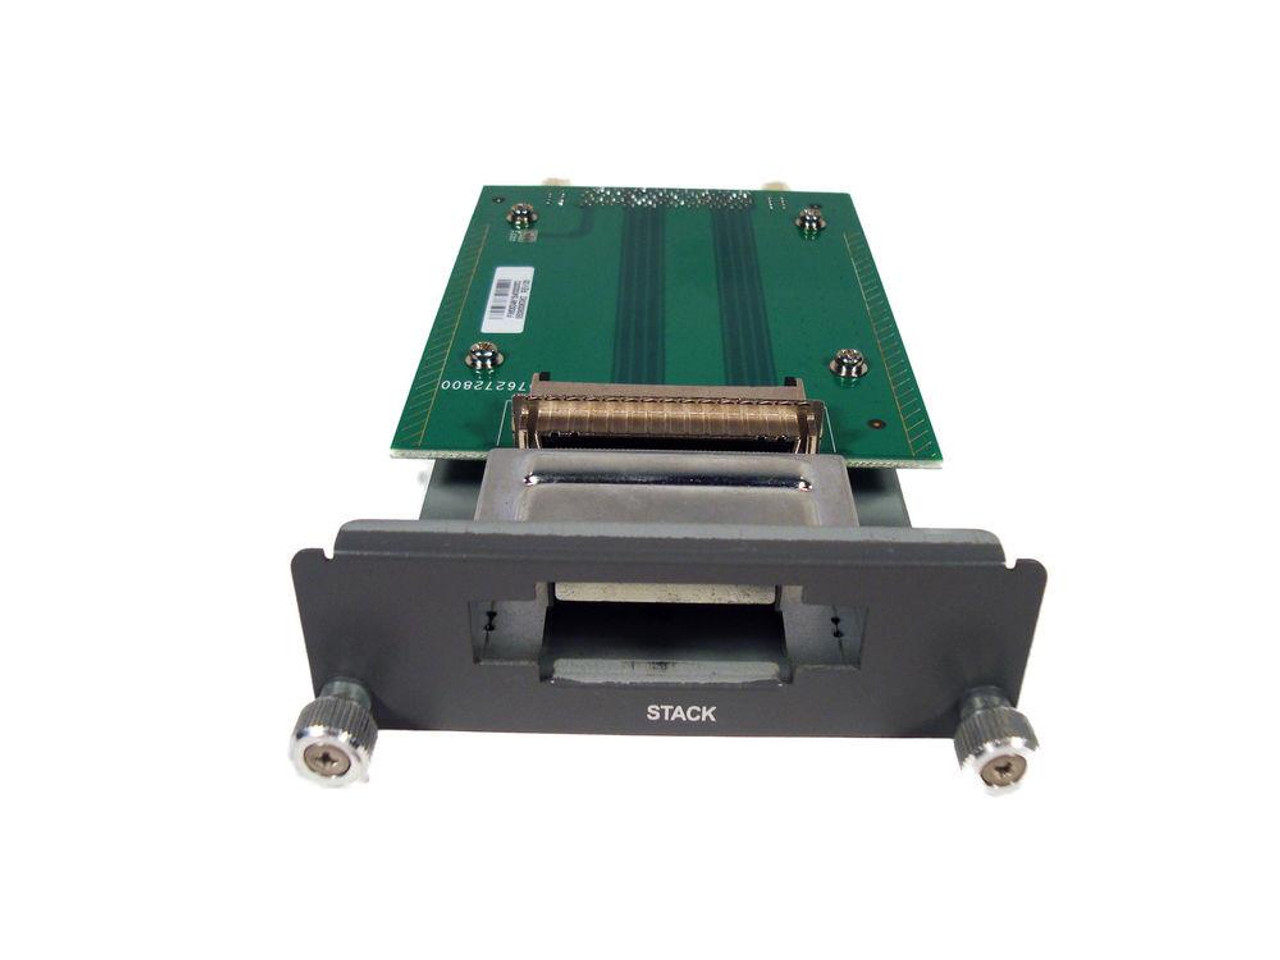 S50-01-24G-1S Force10 1-Port 24Gbps Stacking Module (Refurbished)